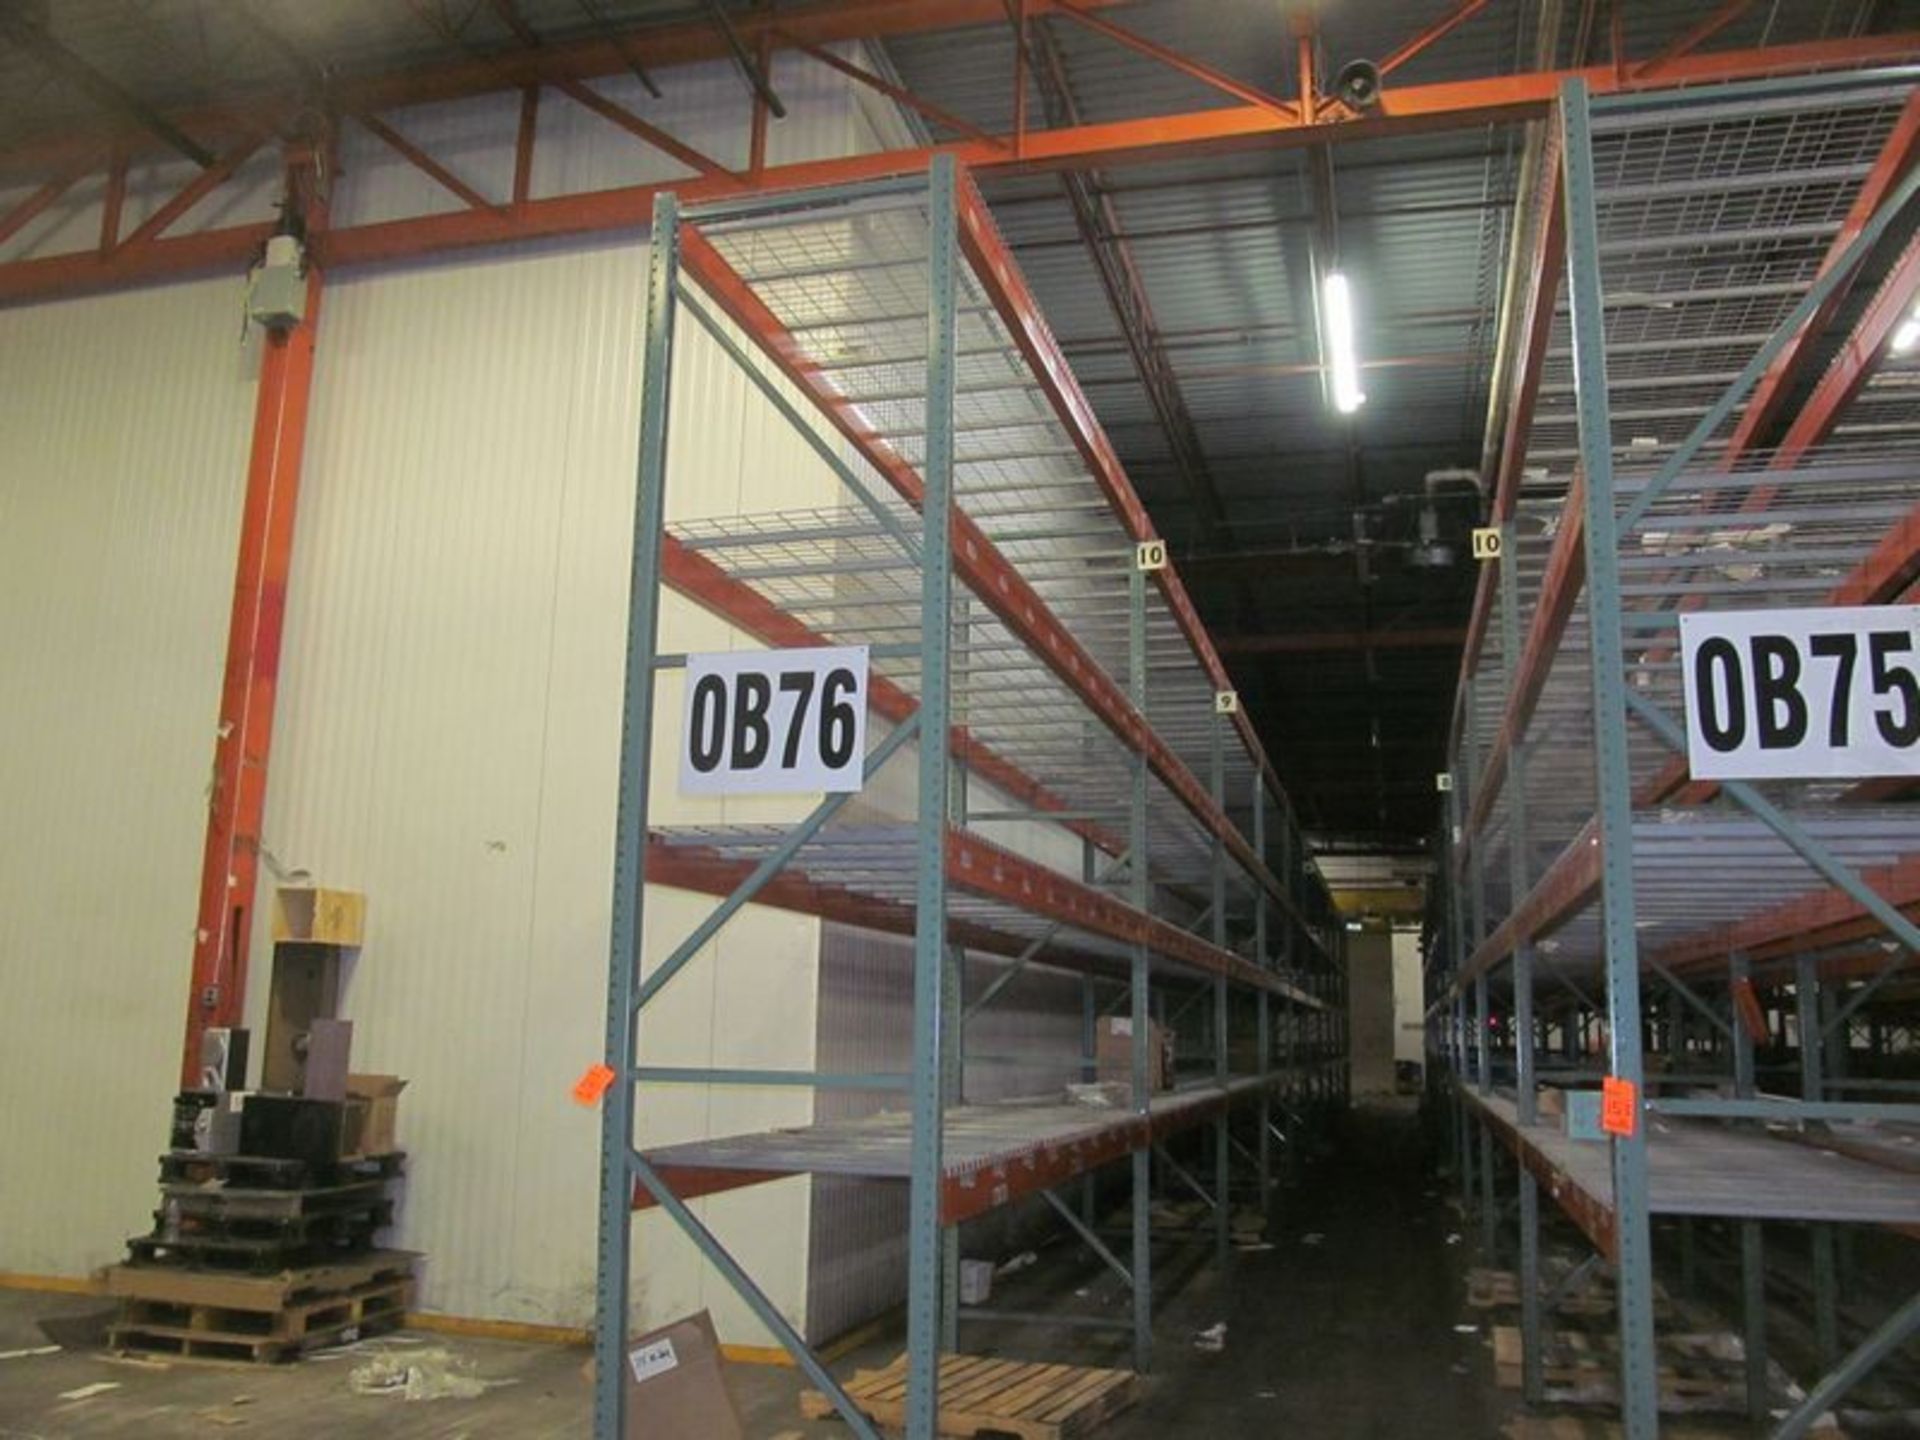 Lot of (10) sections Interack cup style pallet rack (11) 14' high, 3" x 3" uprights, (80) 12'